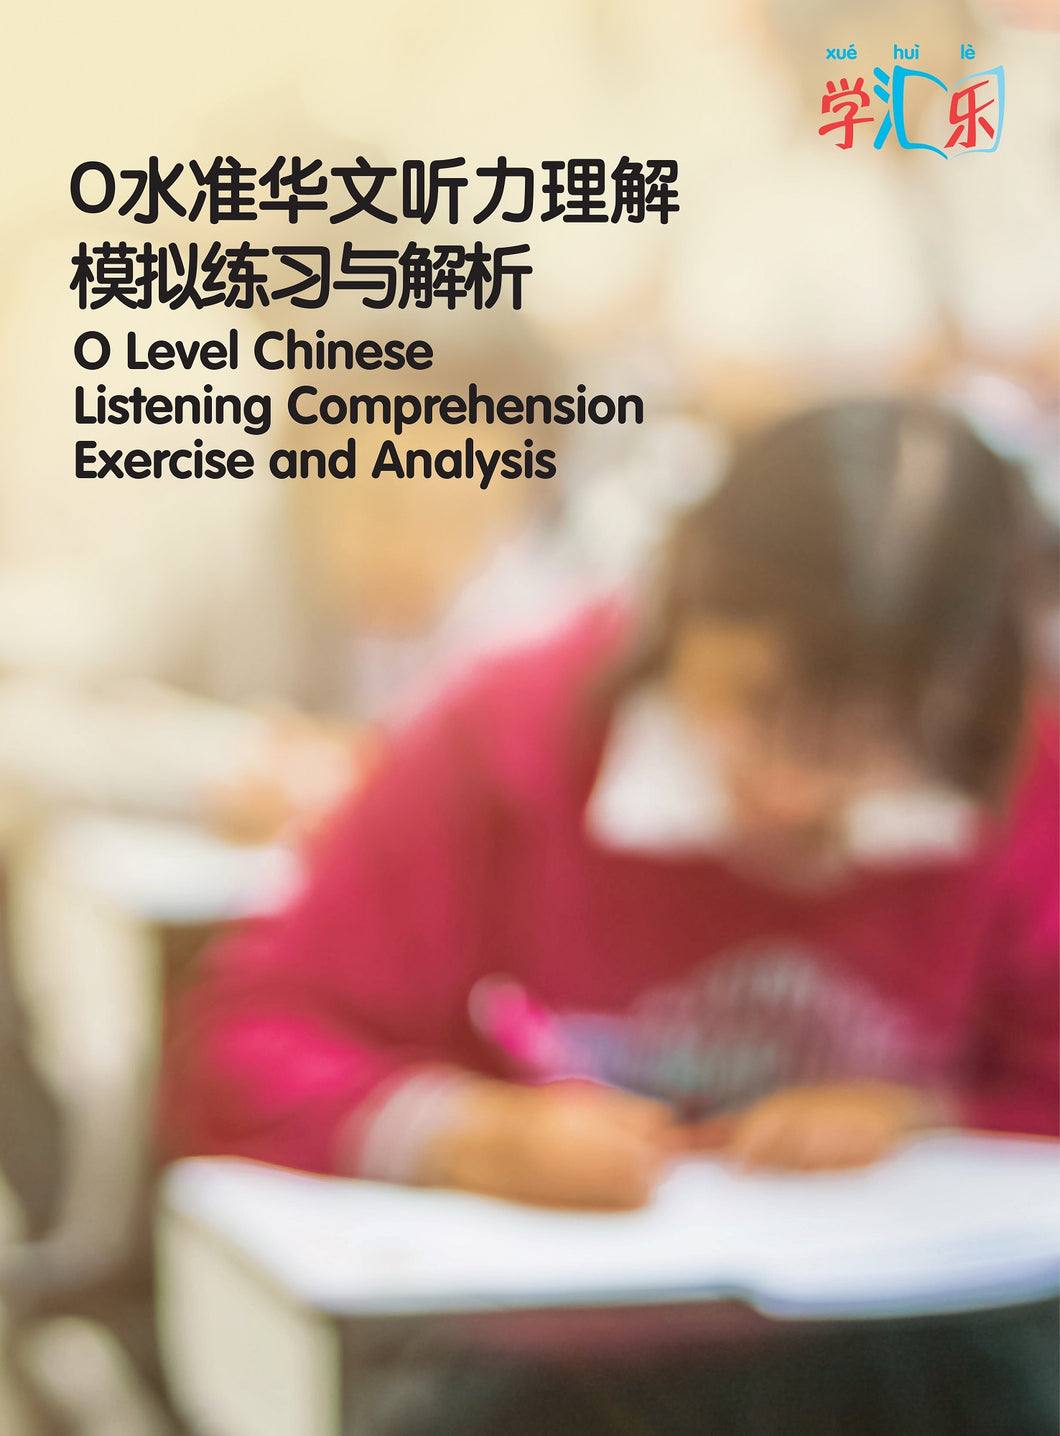 O-Level Chinese Listening Comprehension Exercise and Analysis